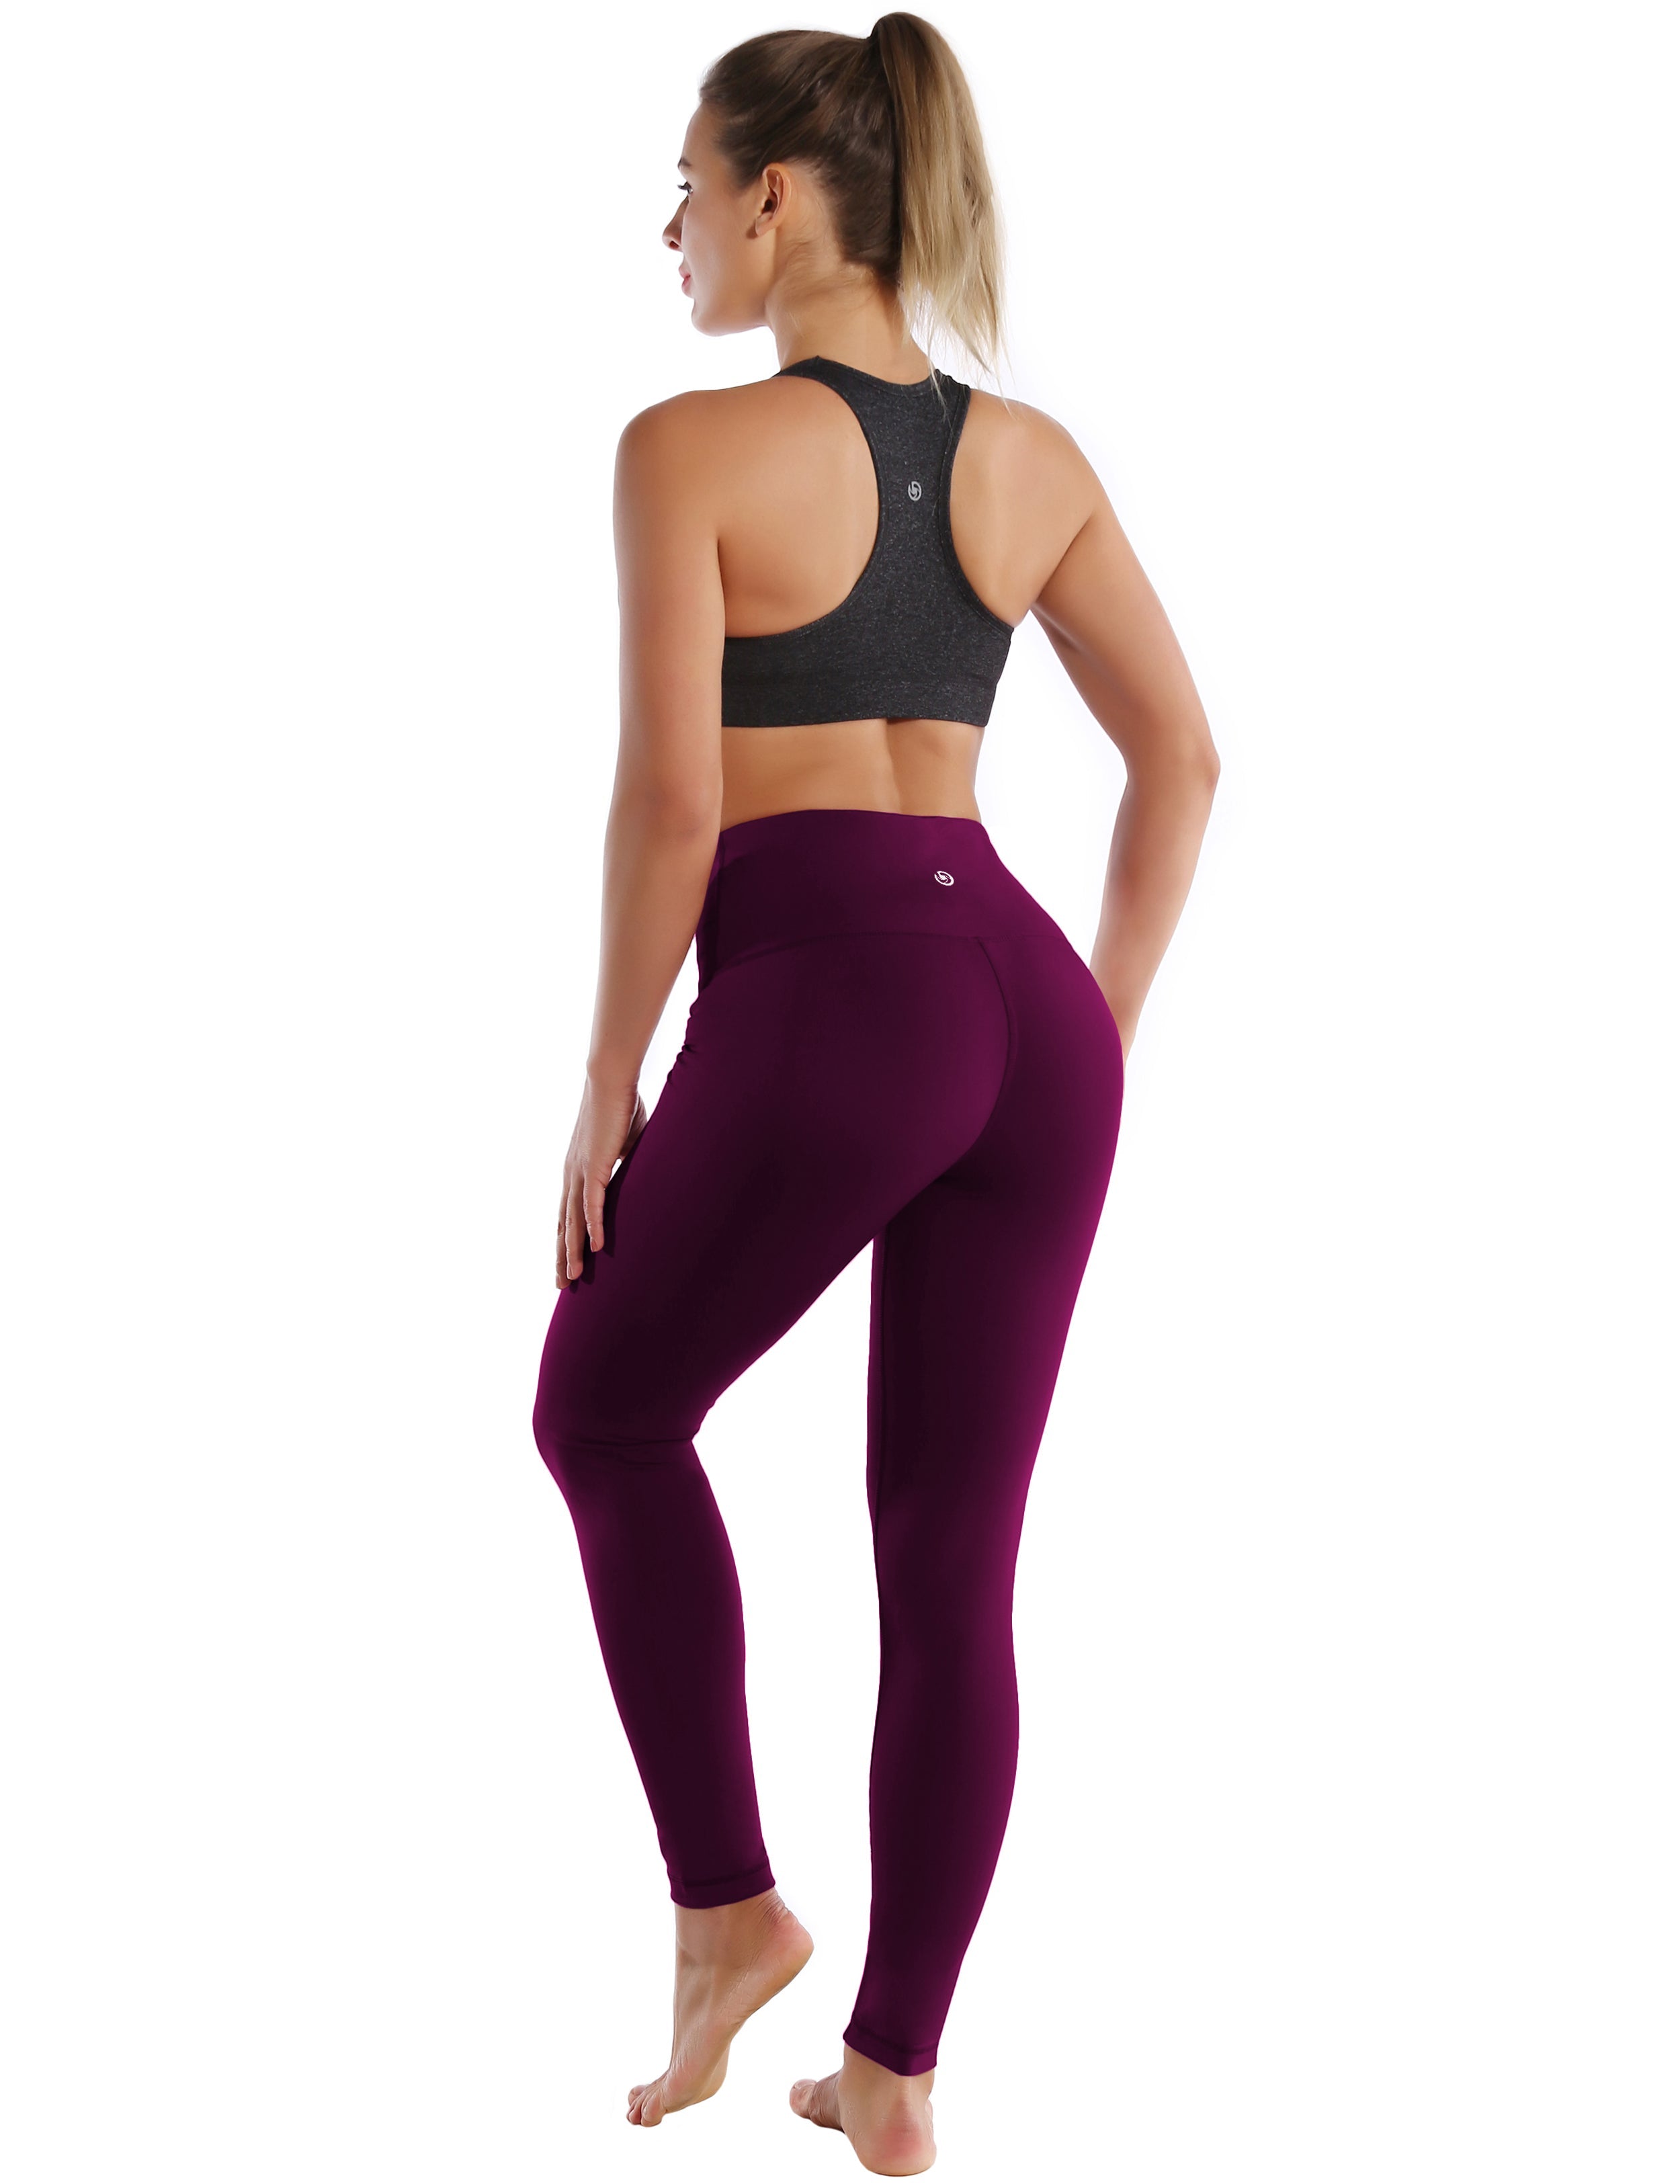 High Waist Jogging Pants grapevine 75%Nylon/25%Spandex Fabric doesn't attract lint easily 4-way stretch No see-through Moisture-wicking Tummy control Inner pocket Four lengths